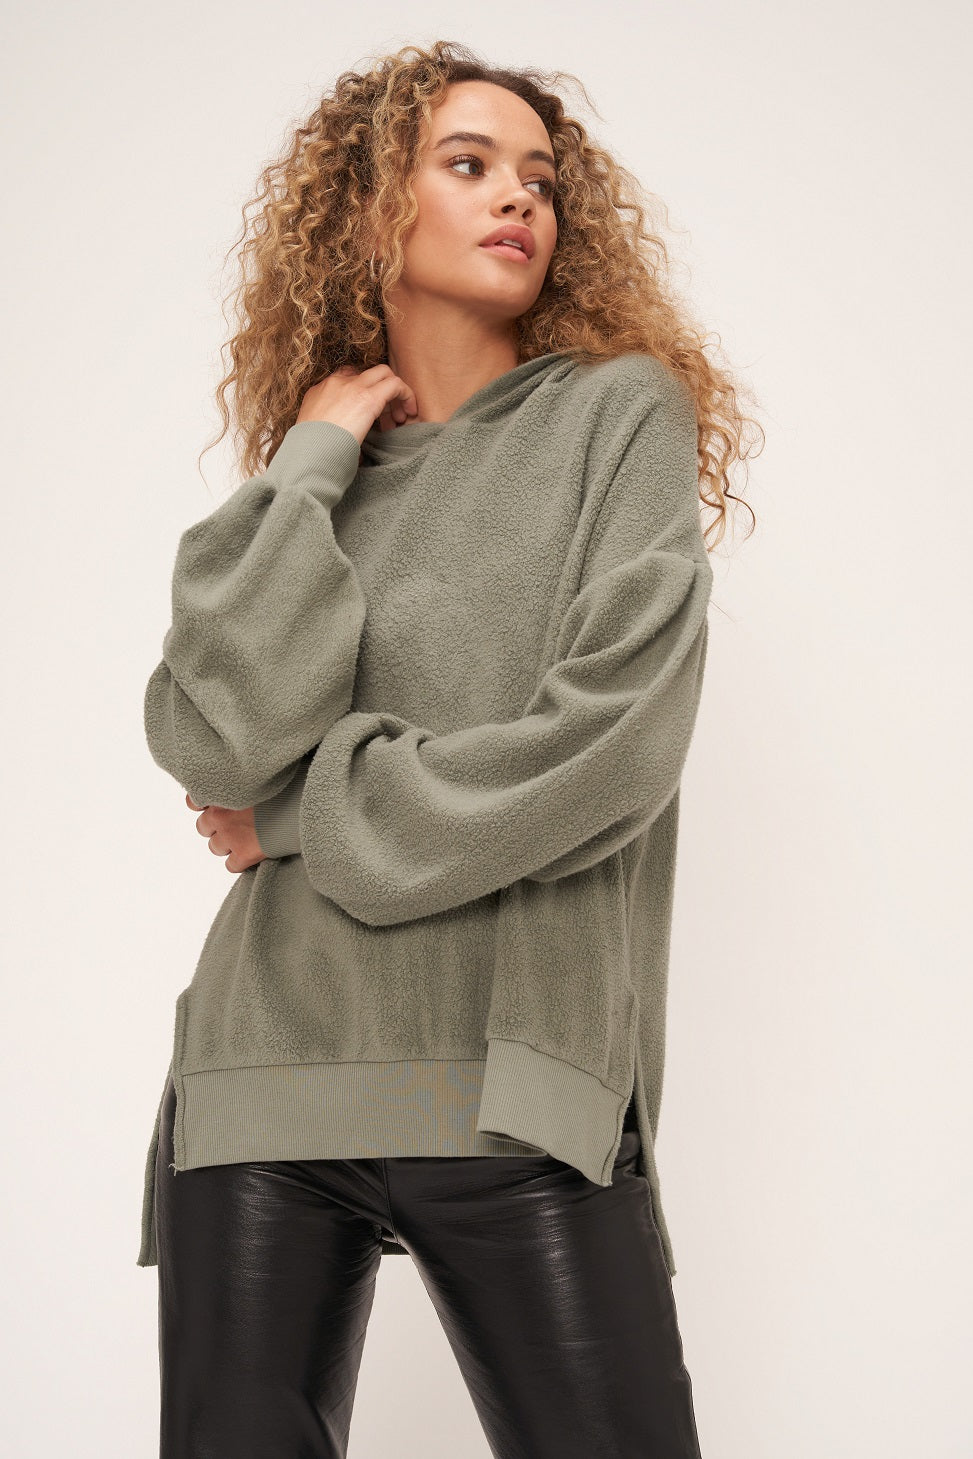 LILA SHERPA HOODIE - WILLOW ASH - Kingfisher Road - Online Boutique